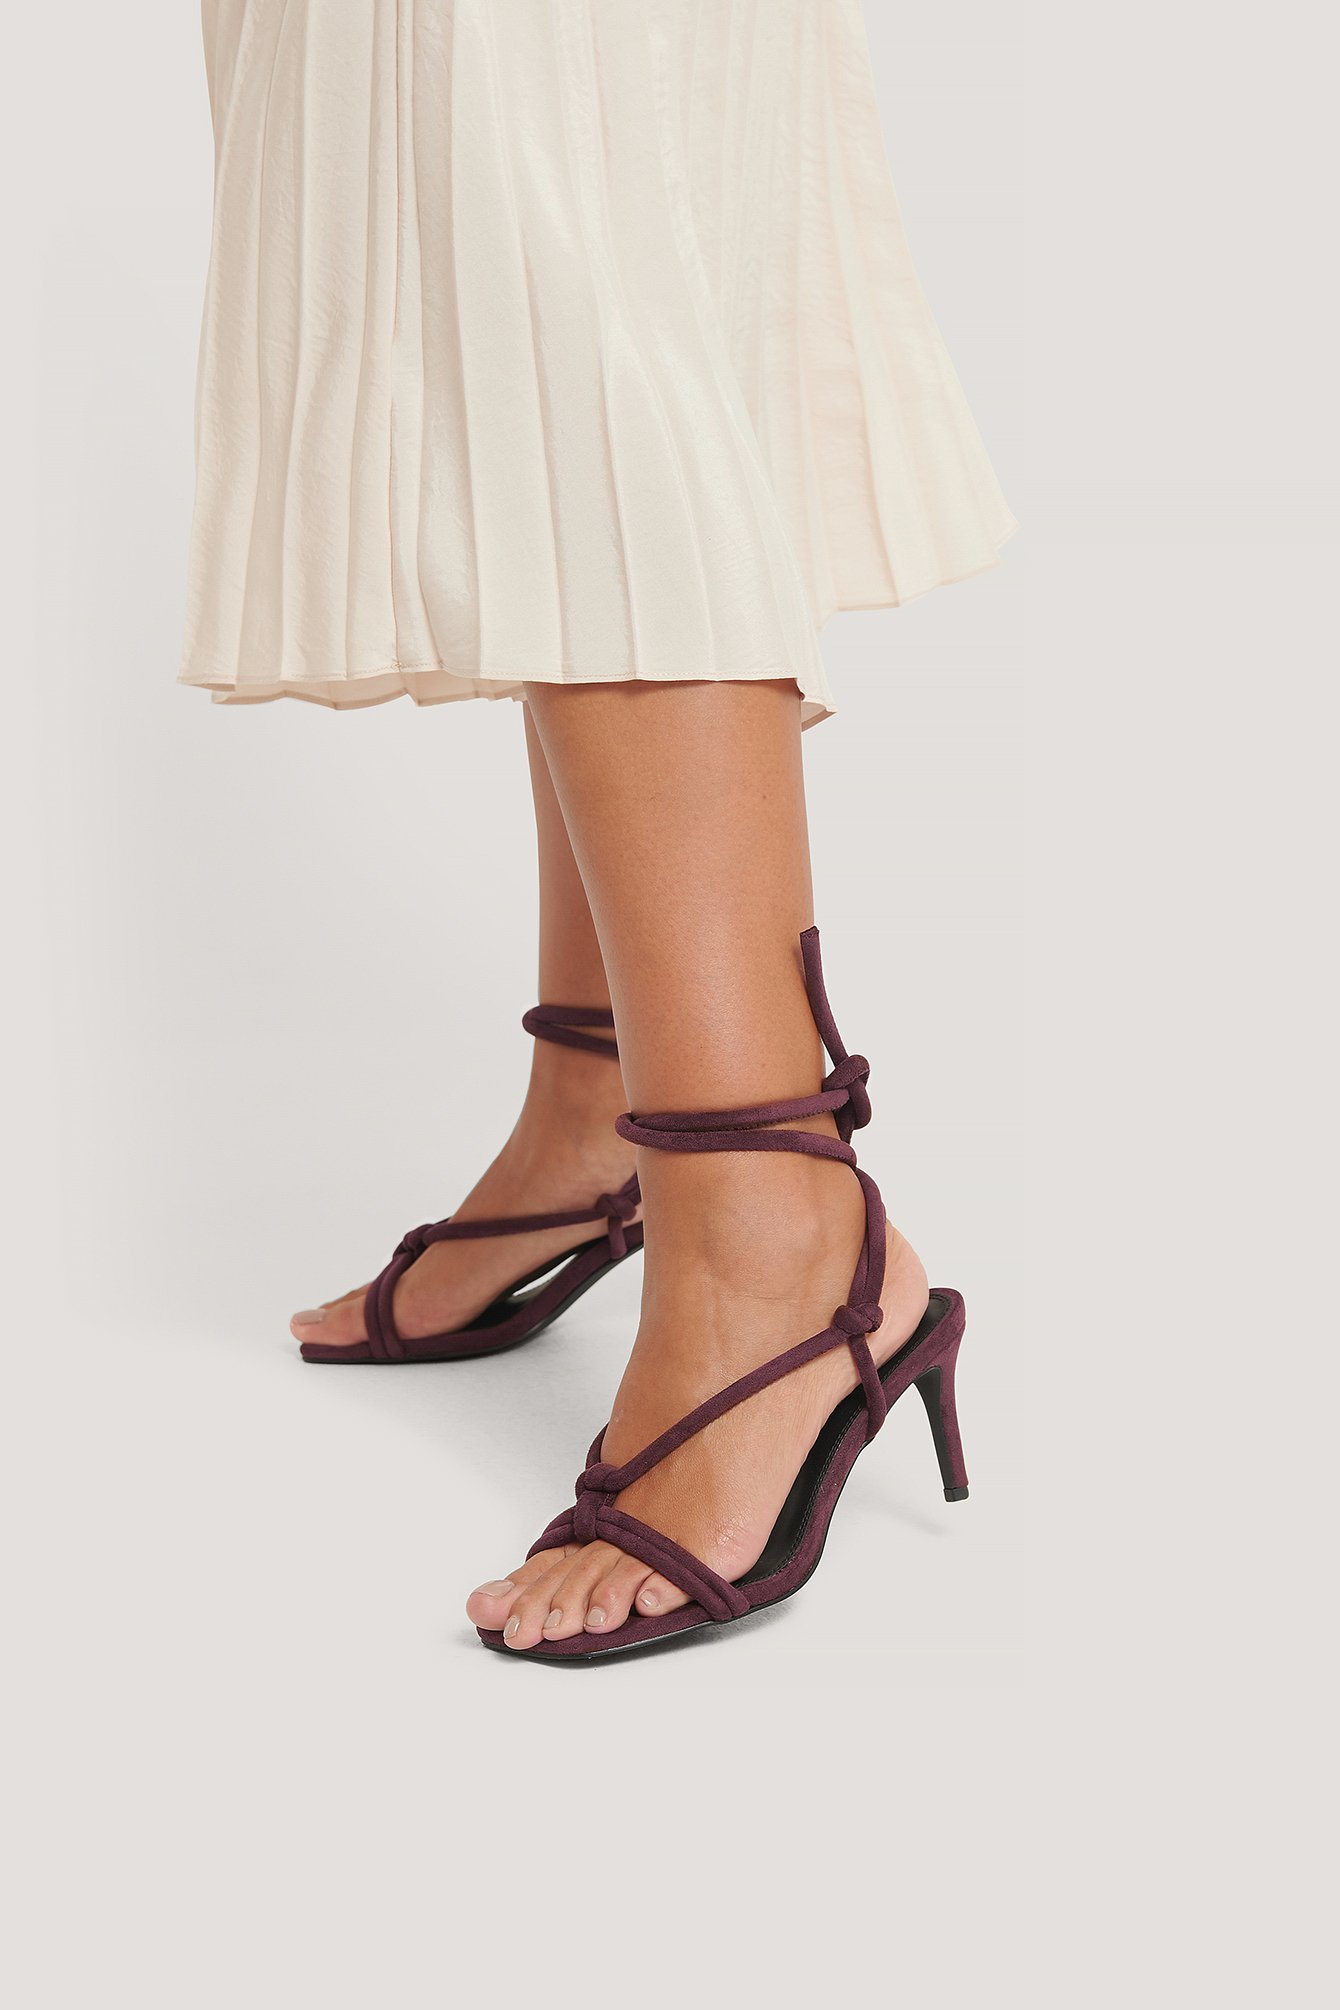 Burgundy Knotted Straps Heeled Sandals